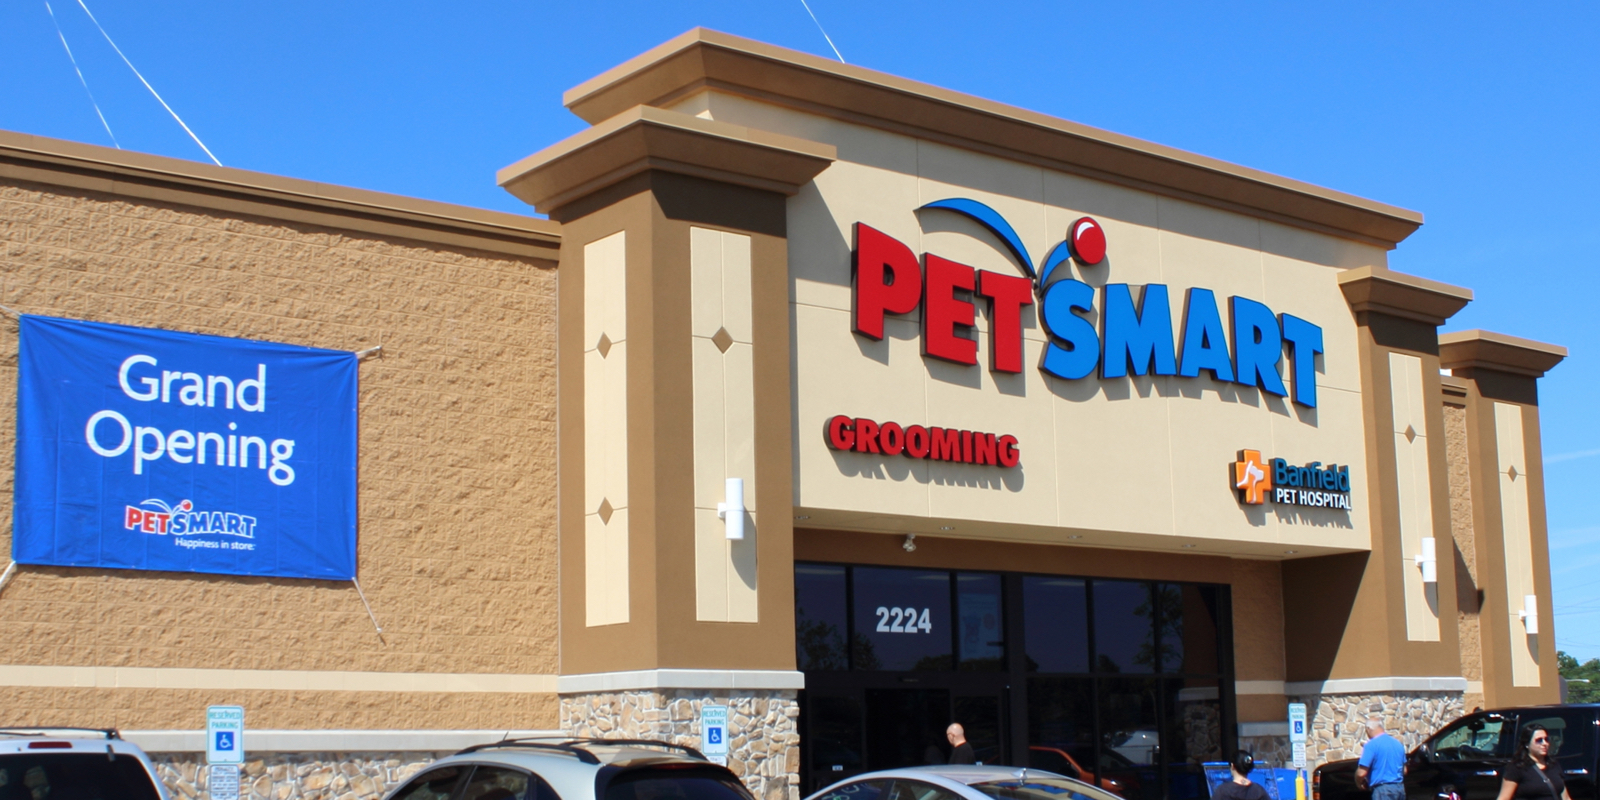 today-only-you-can-get-7-off-a-7-purchase-or-more-at-petsmart-with